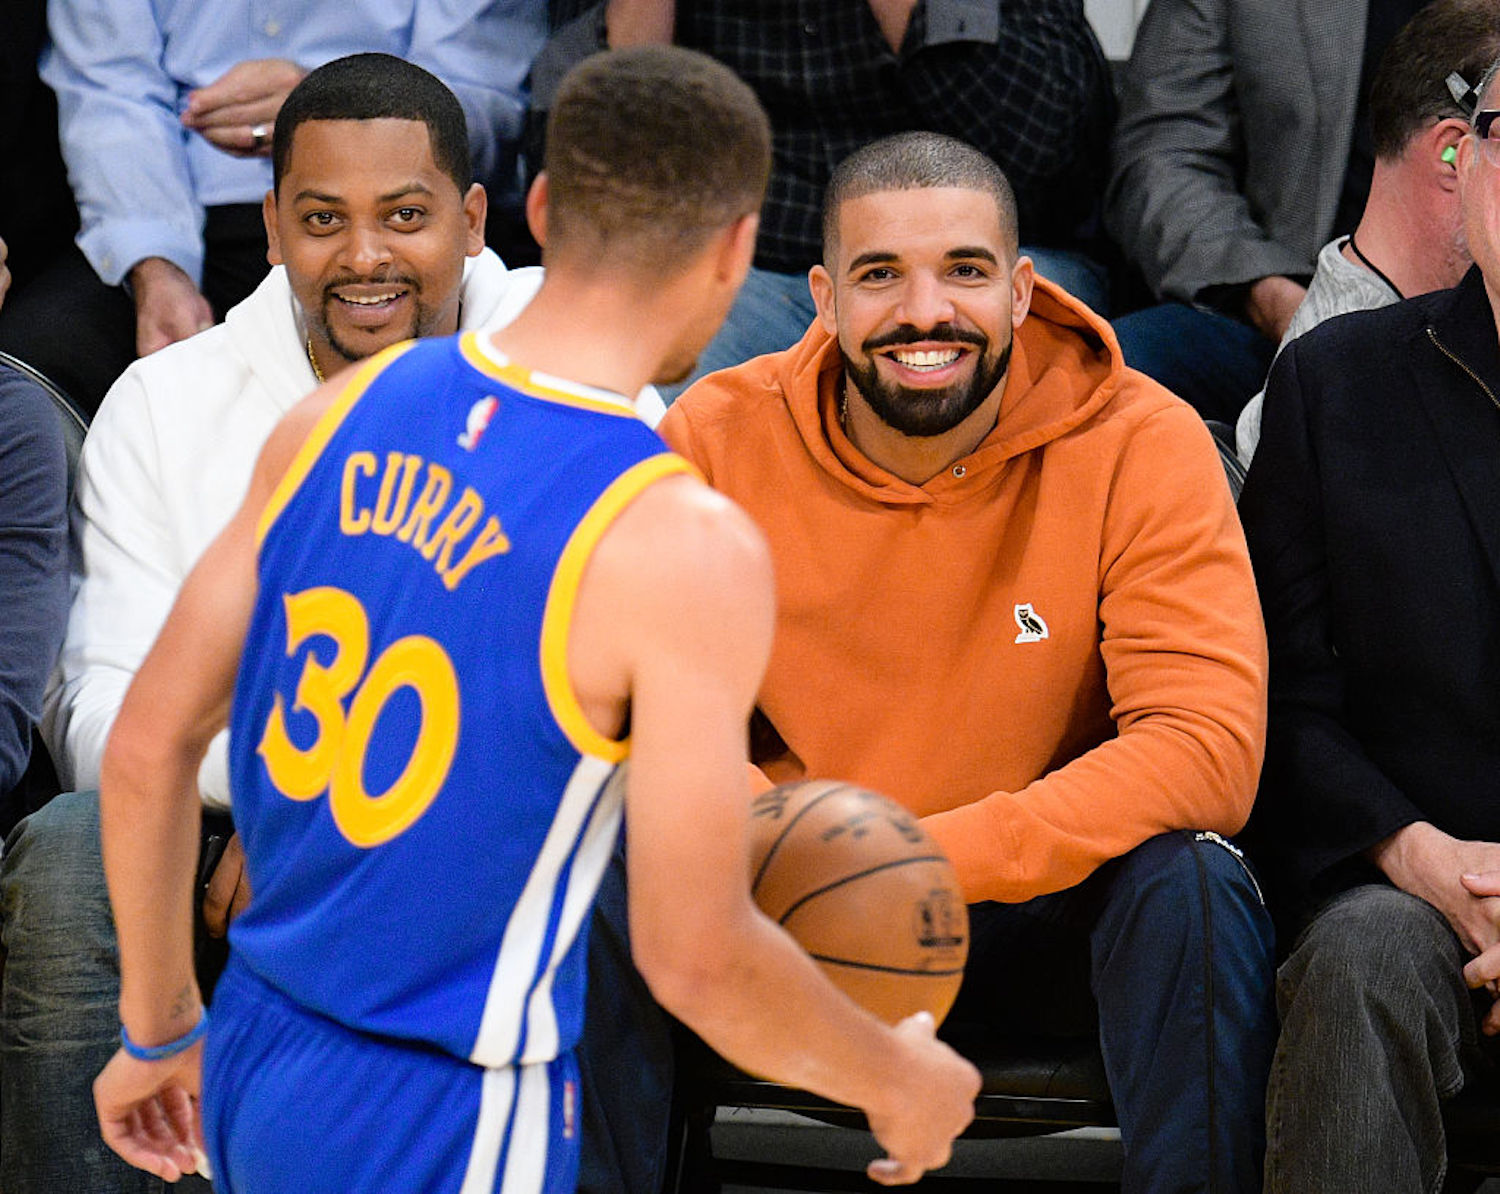 Warriors Head Coach Steve Kerr Once Fined Drake $500 for Making His 2 Star Players Late